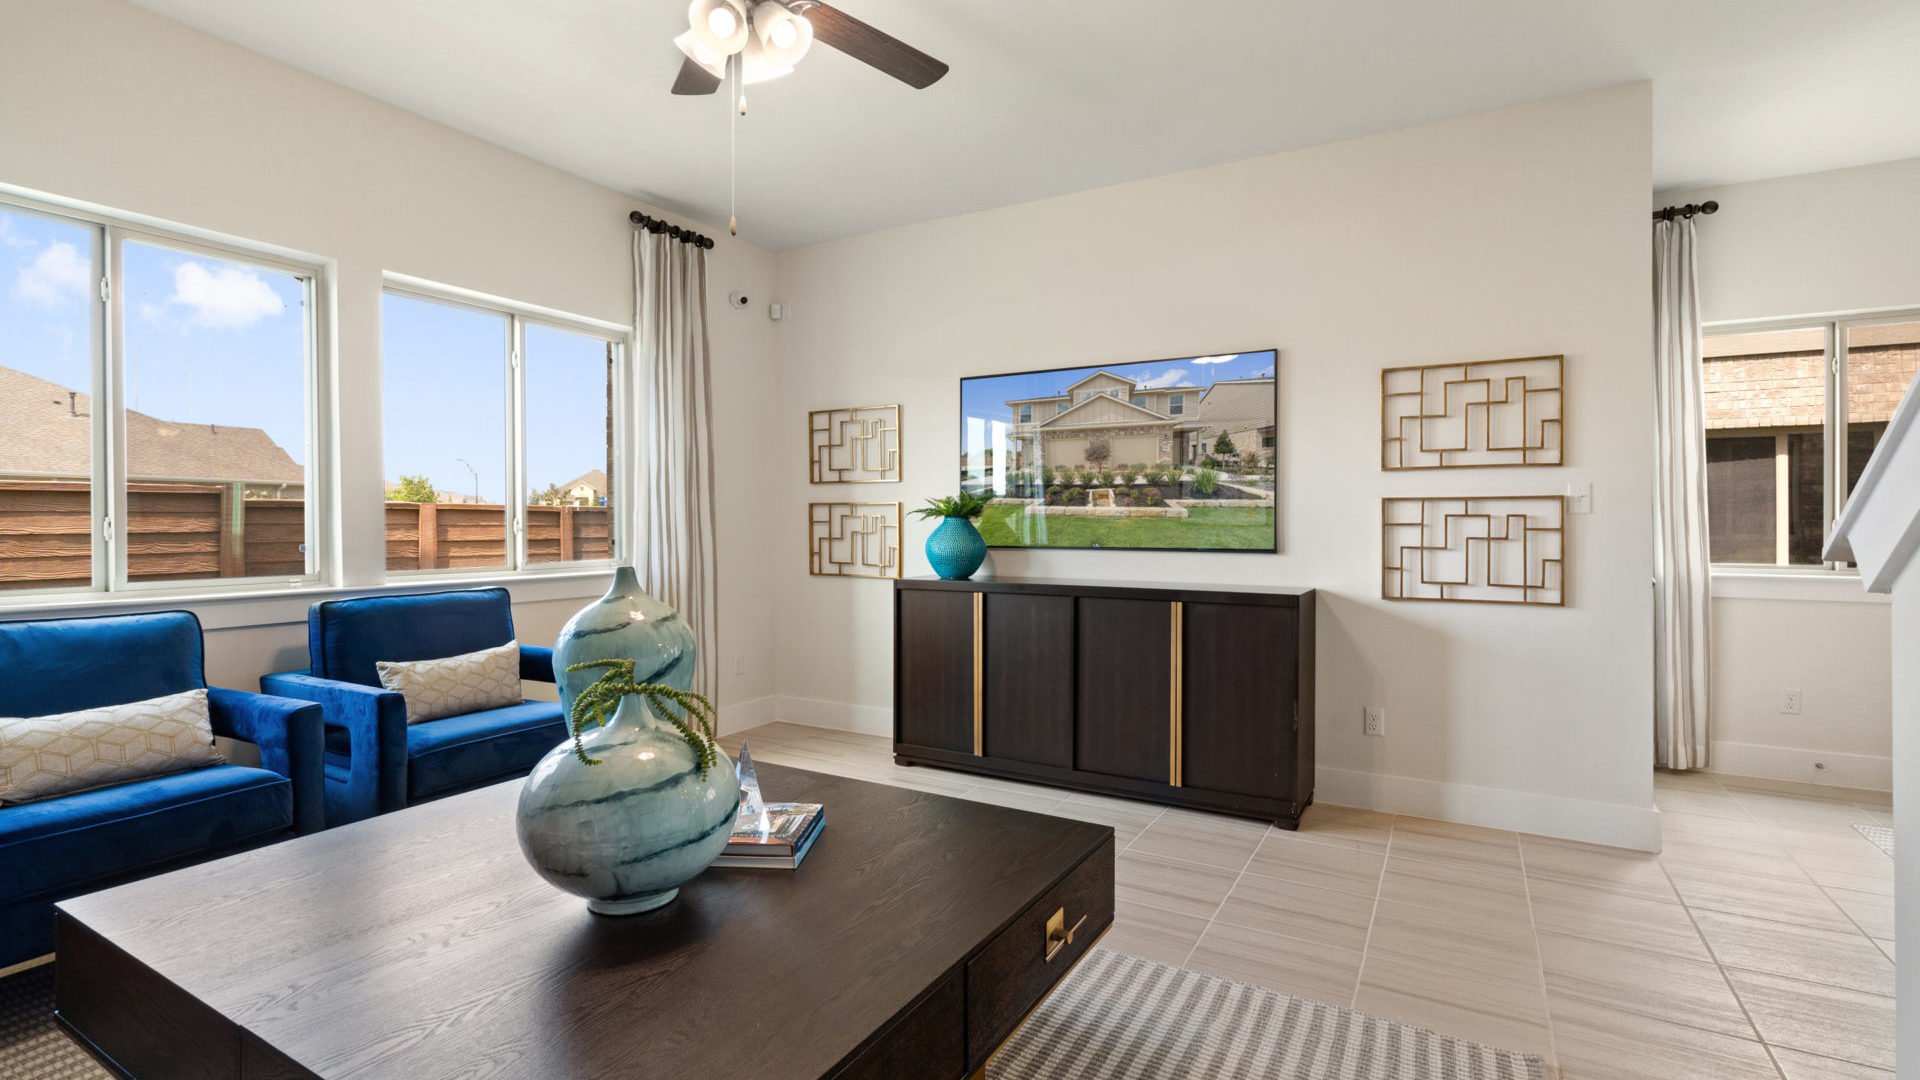 Saddle Creek Twinhomes new homes in Georgetown, TX